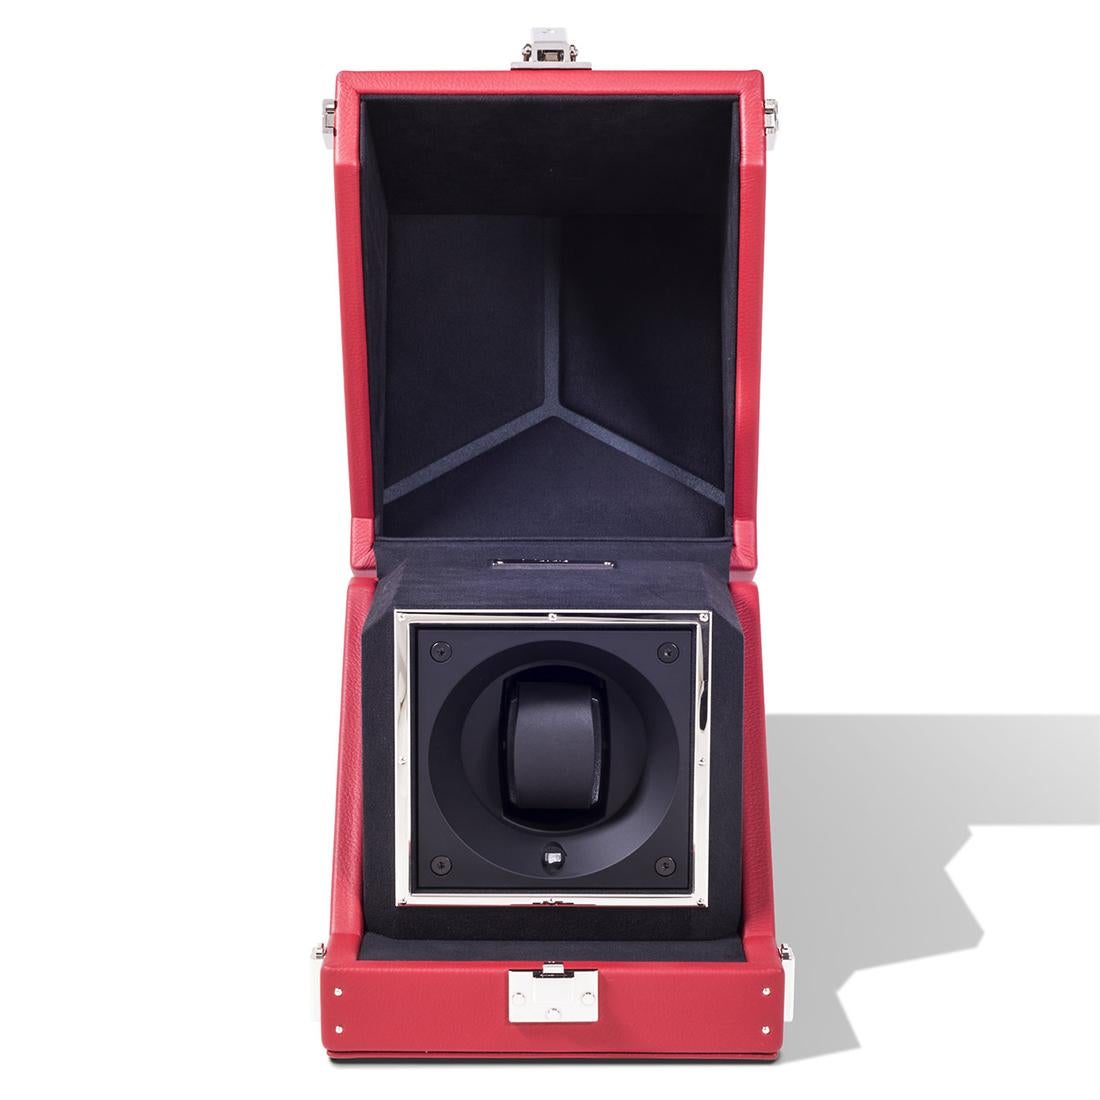 Box single Luxwatch red covered with red grained
cowhide leather. With jewelry parts in solid brass,
with hand polished nickel-plated. With bottom feet
in hand polished and nickel-plated solid brass.
Padding and lining in black slate dinamica